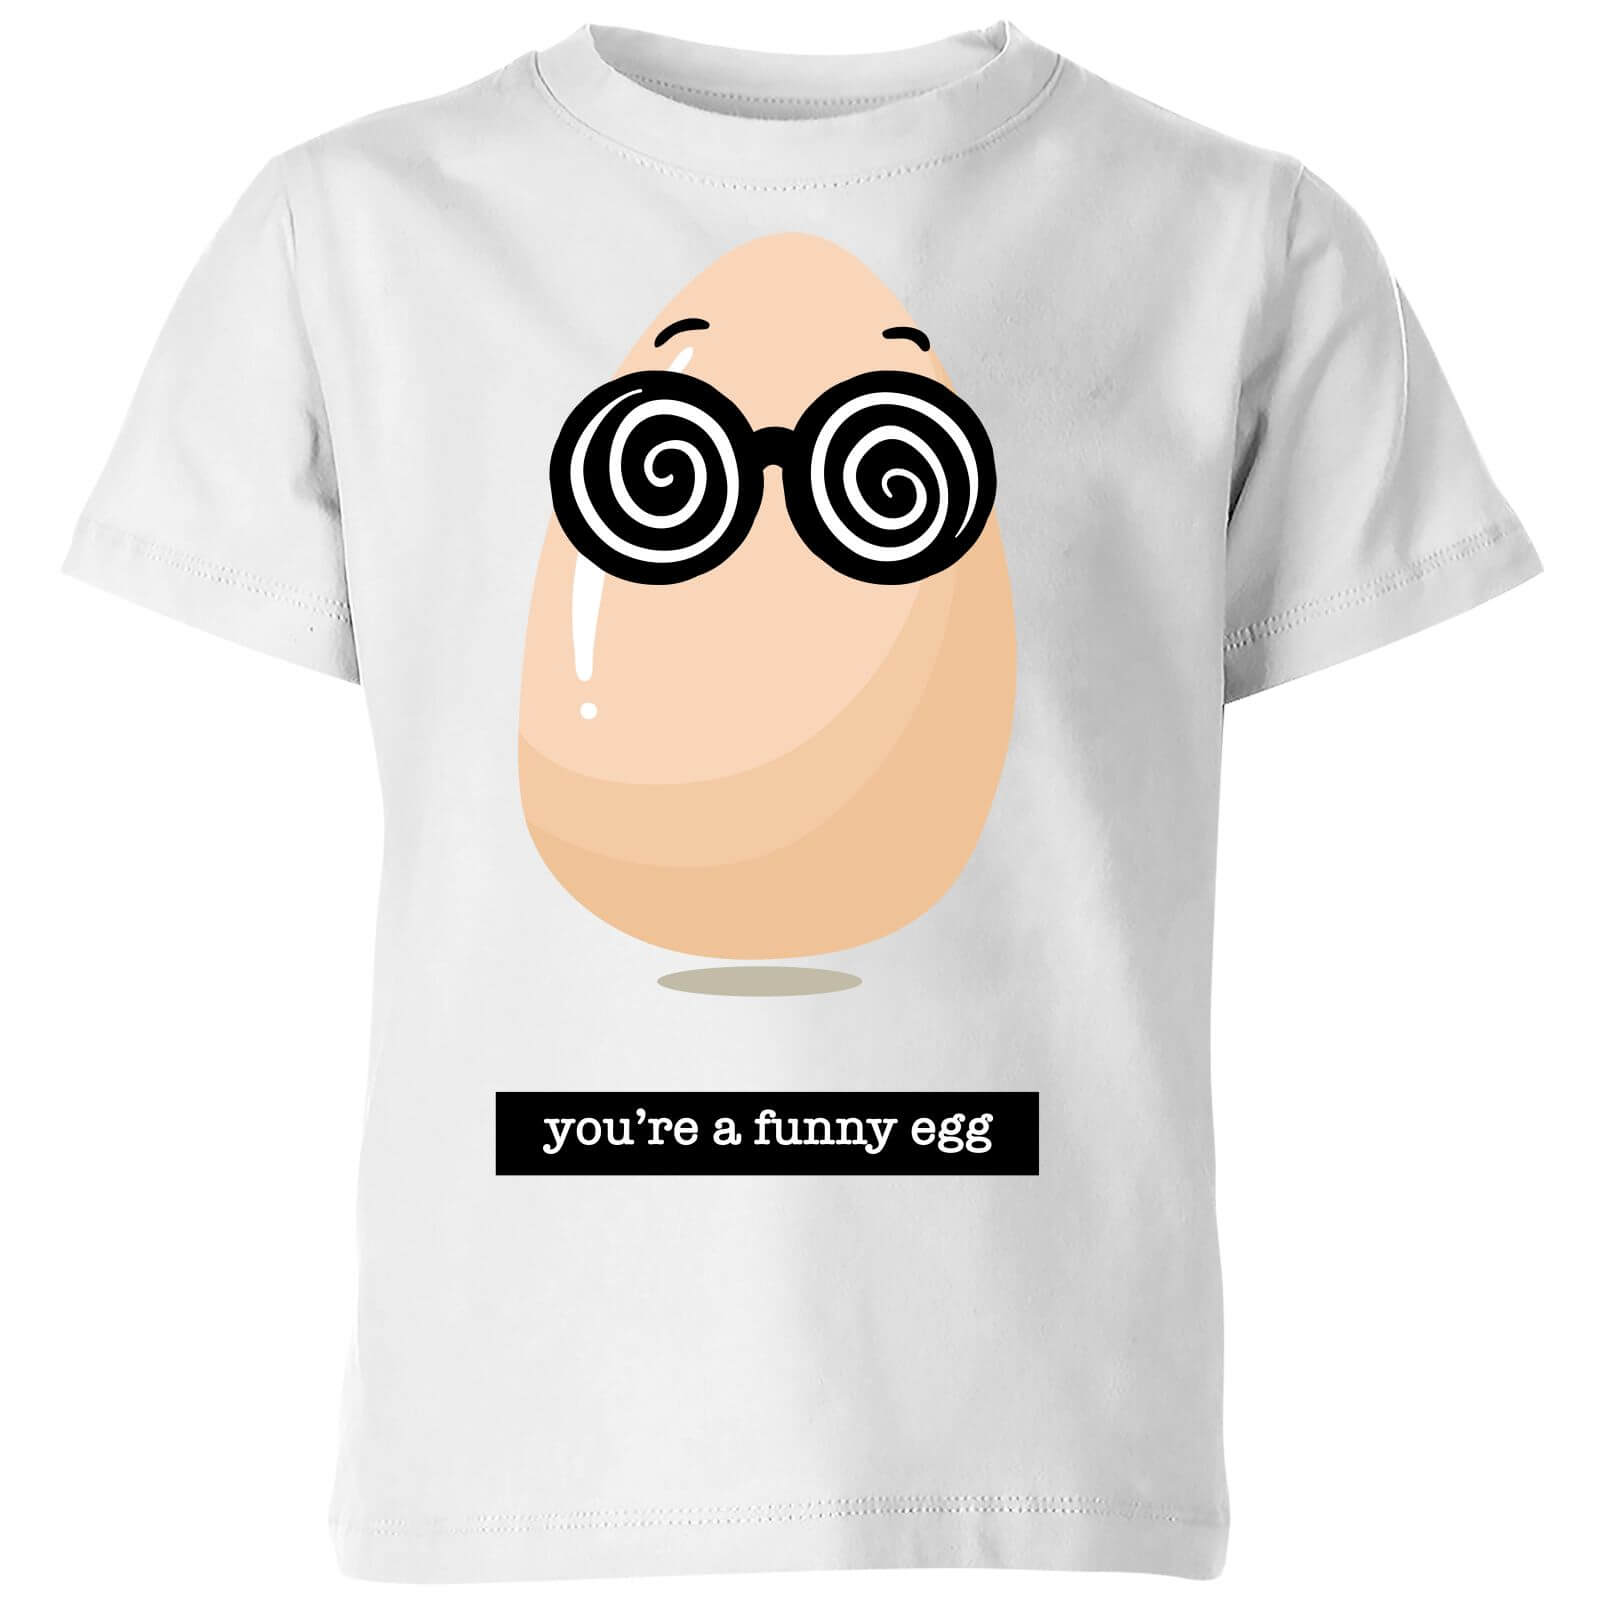 You're A Funny Egg Kids' T-Shirt - White - 5-6 Years - White